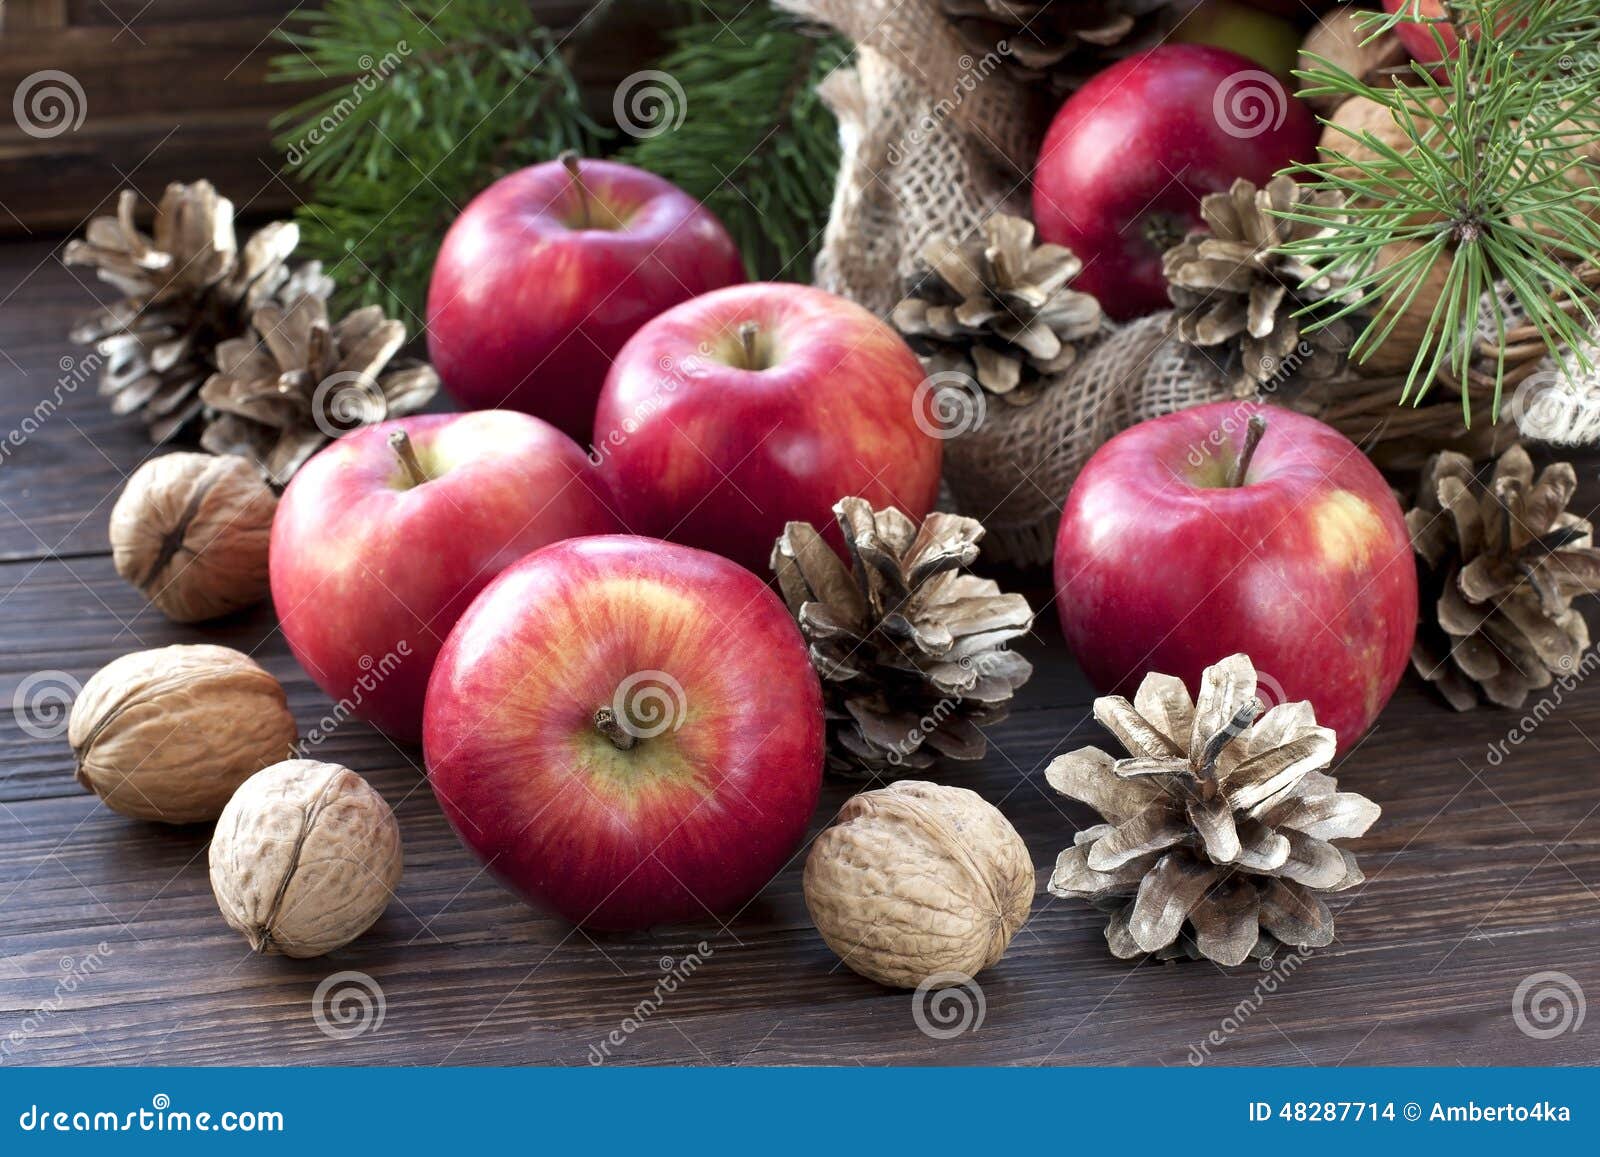 Christmas Still Life with Apples and Pine Cones Stock Photo - Image of ...